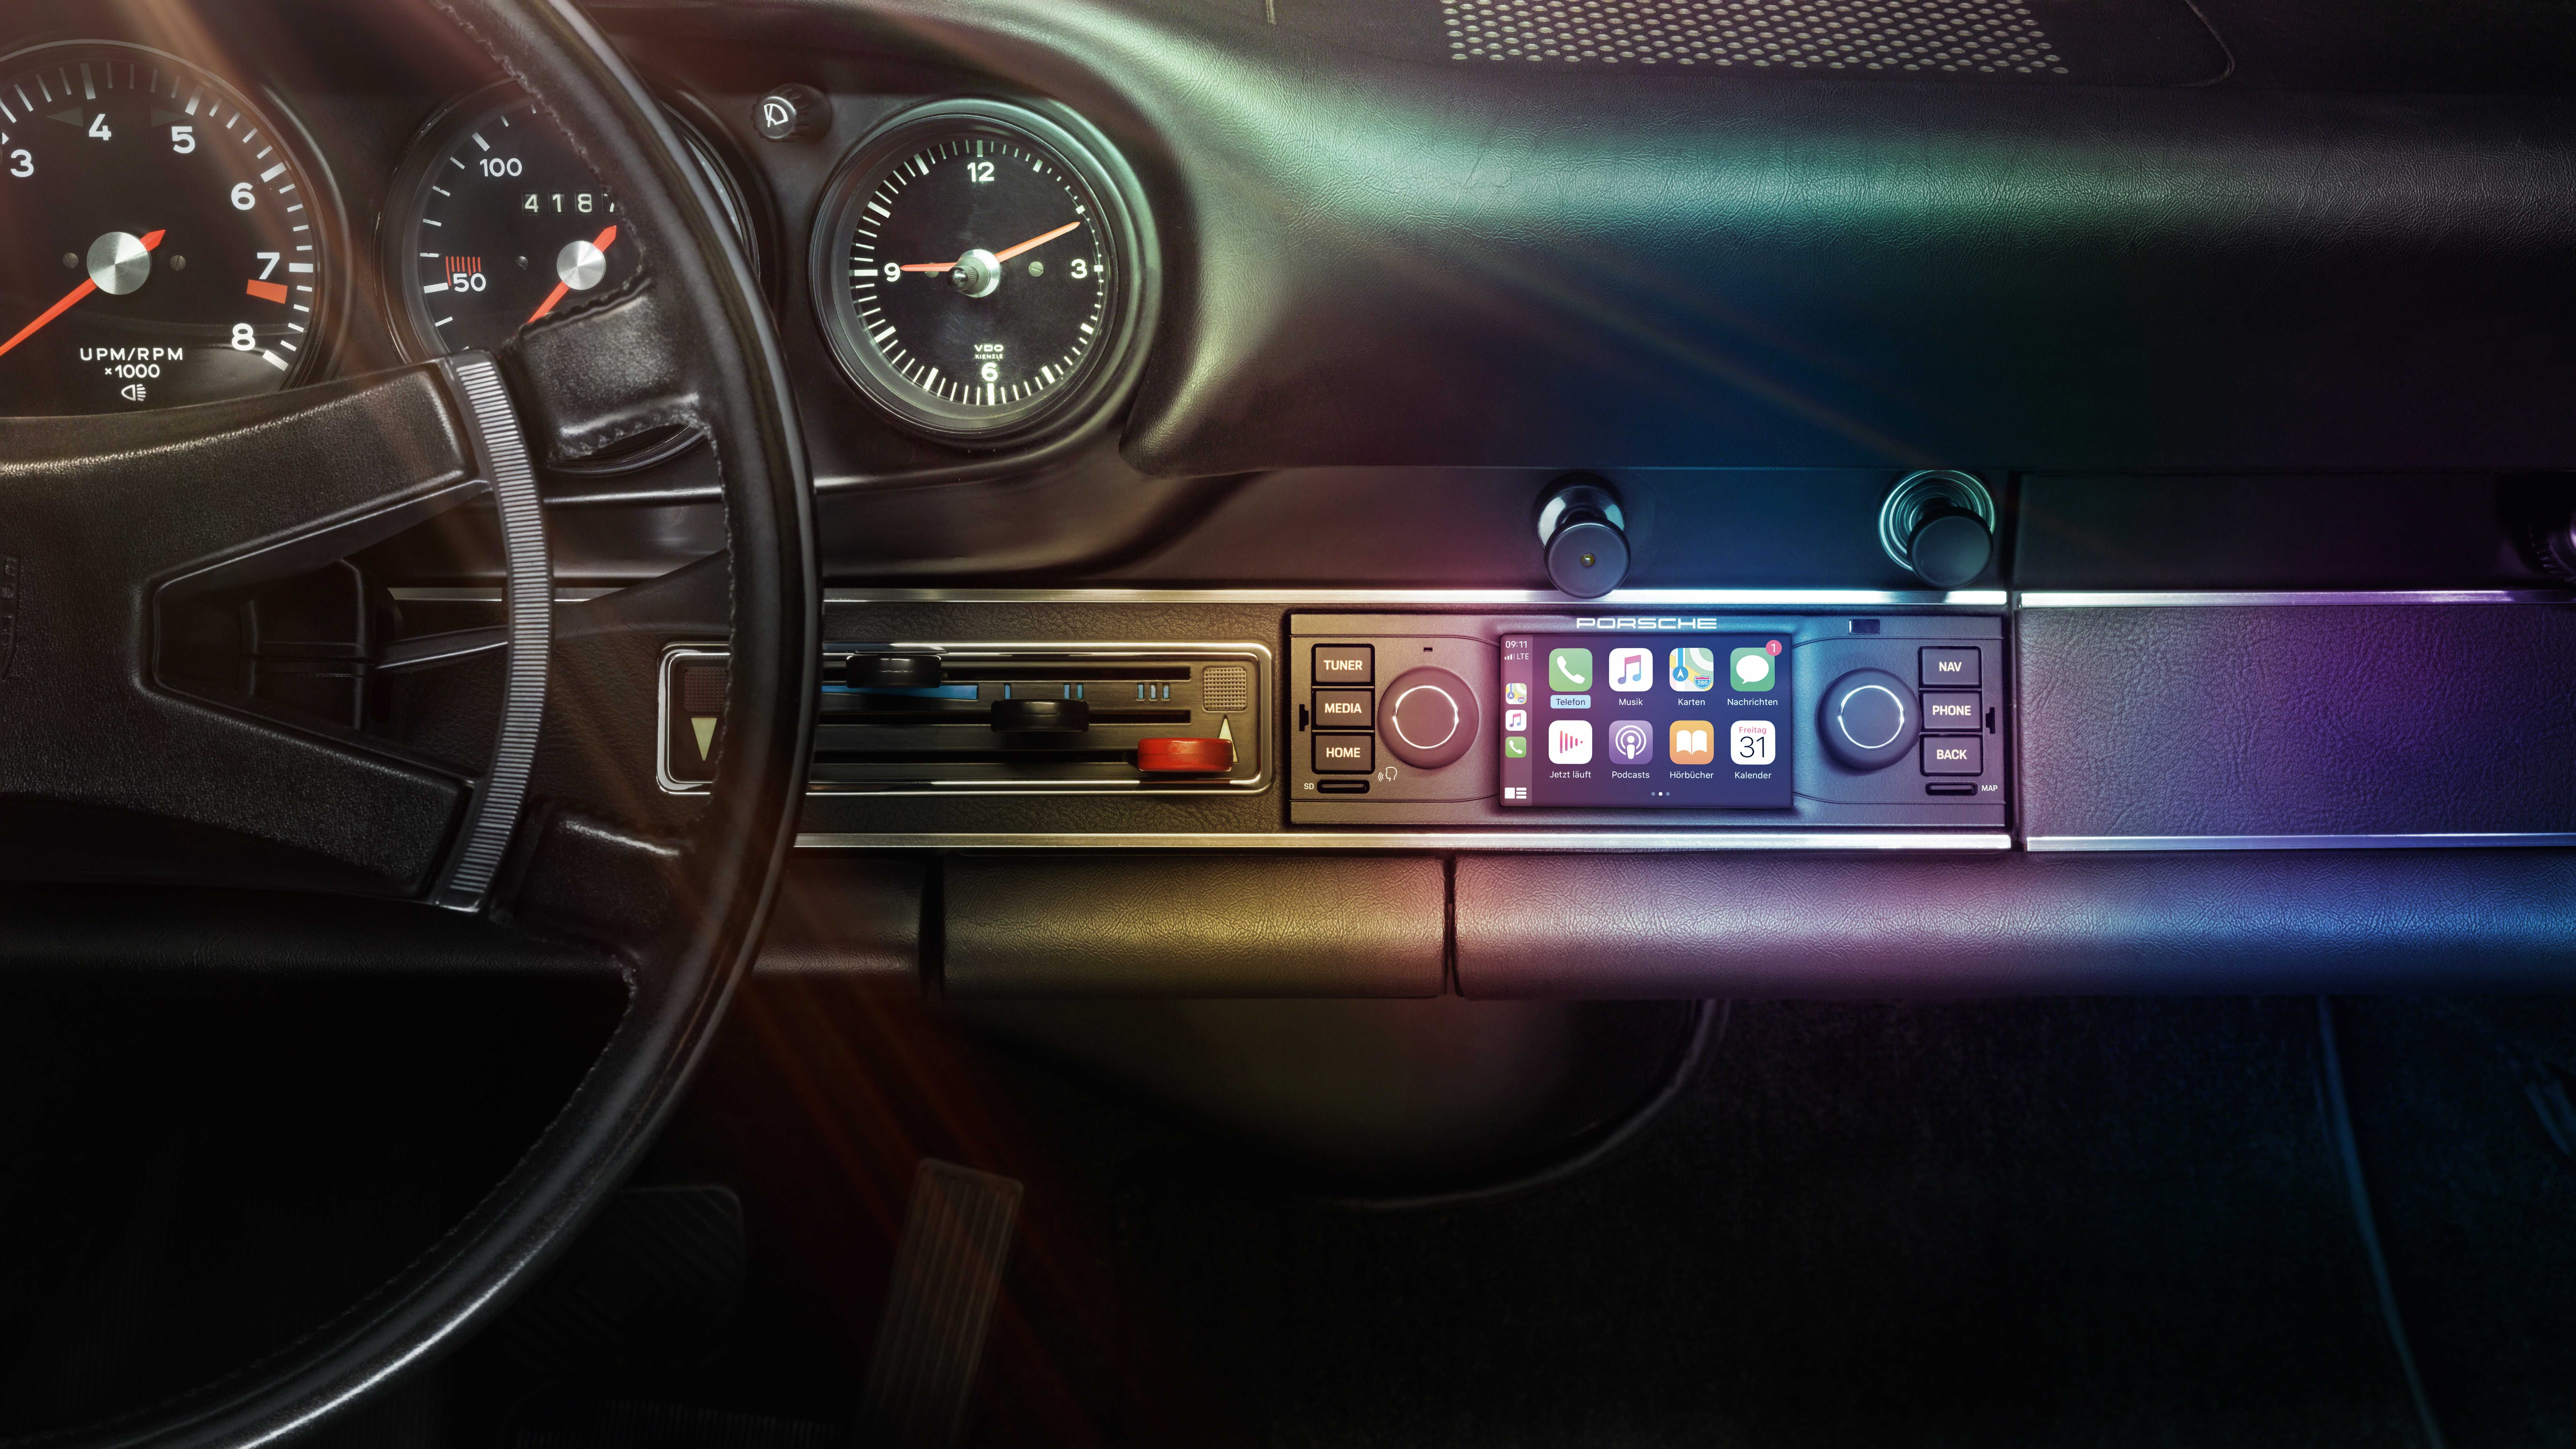 Porsche Will Sell You a CarPlay-Ready Radio for Your Vintage Ride